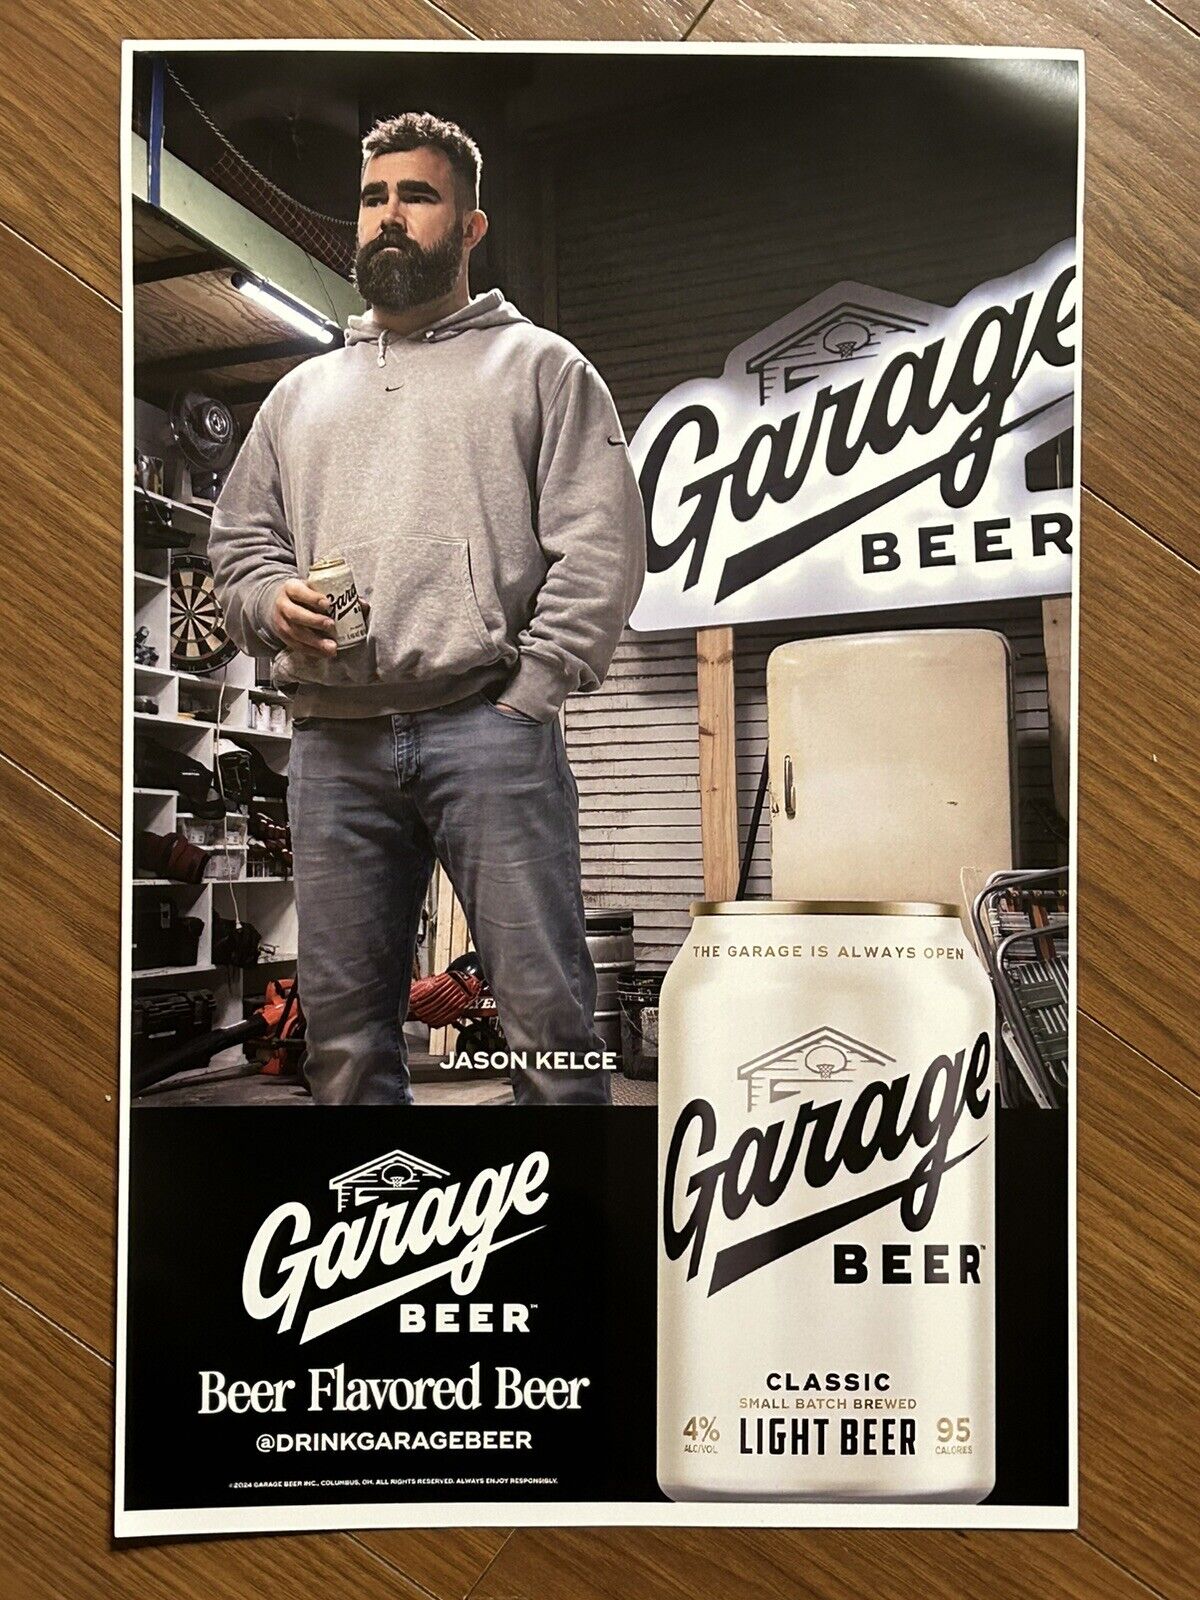 JASON KELCE Garage Beer 11 X 17 PROMOTIONAL Poster EAGLES Travis Authentic